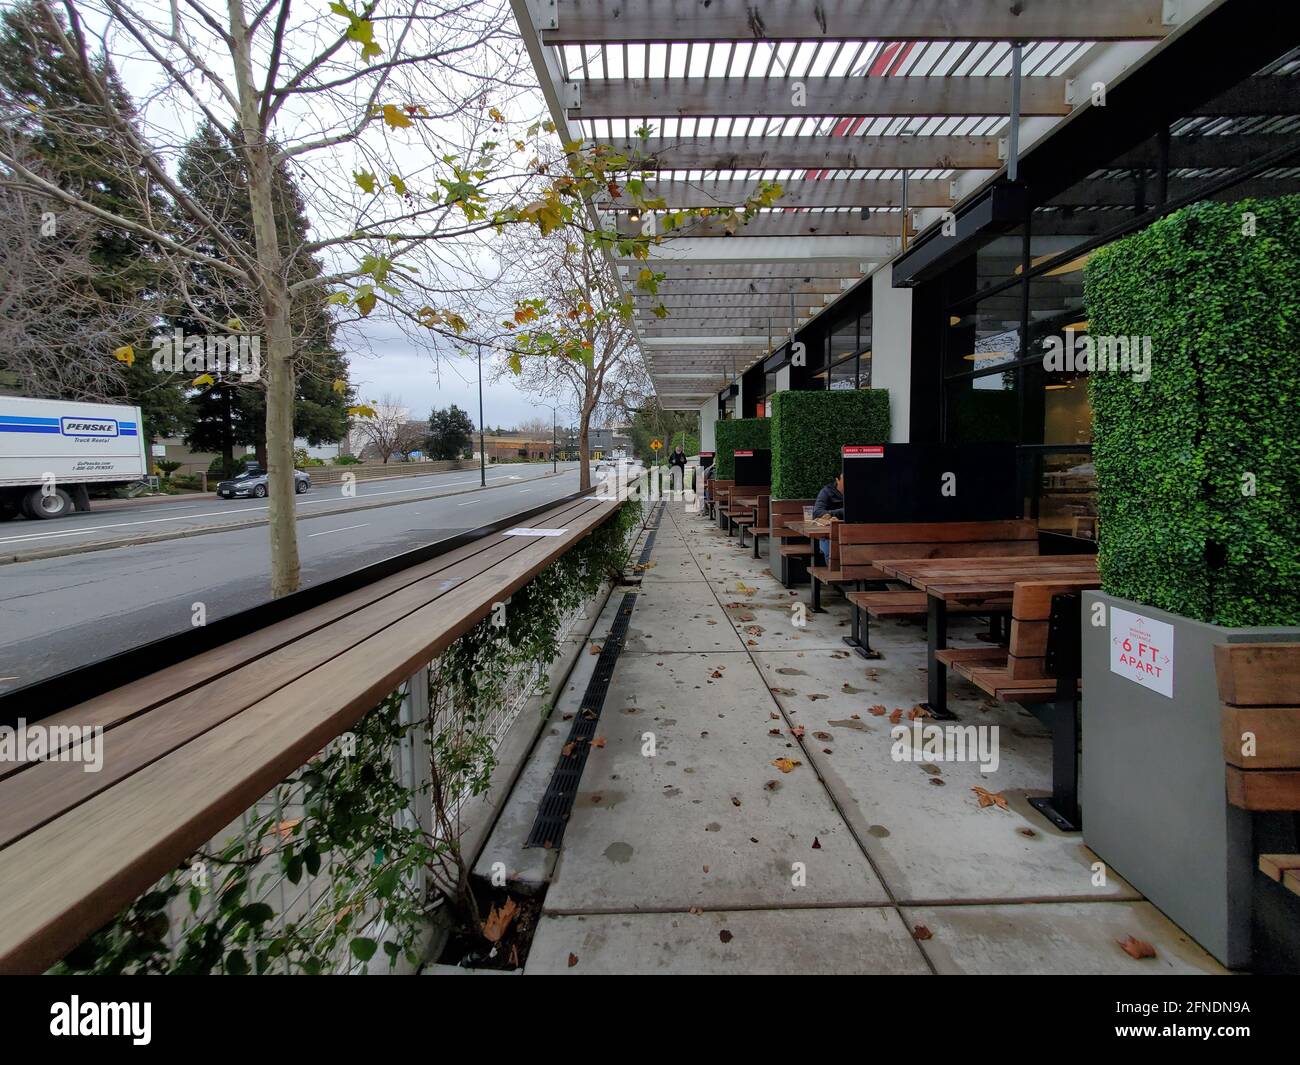 Photograph of the outdoor seating area with tables and benches at Gott's Roadside Restaurant in Walnut Creek, California, January 27, 2021. () Stock Photo